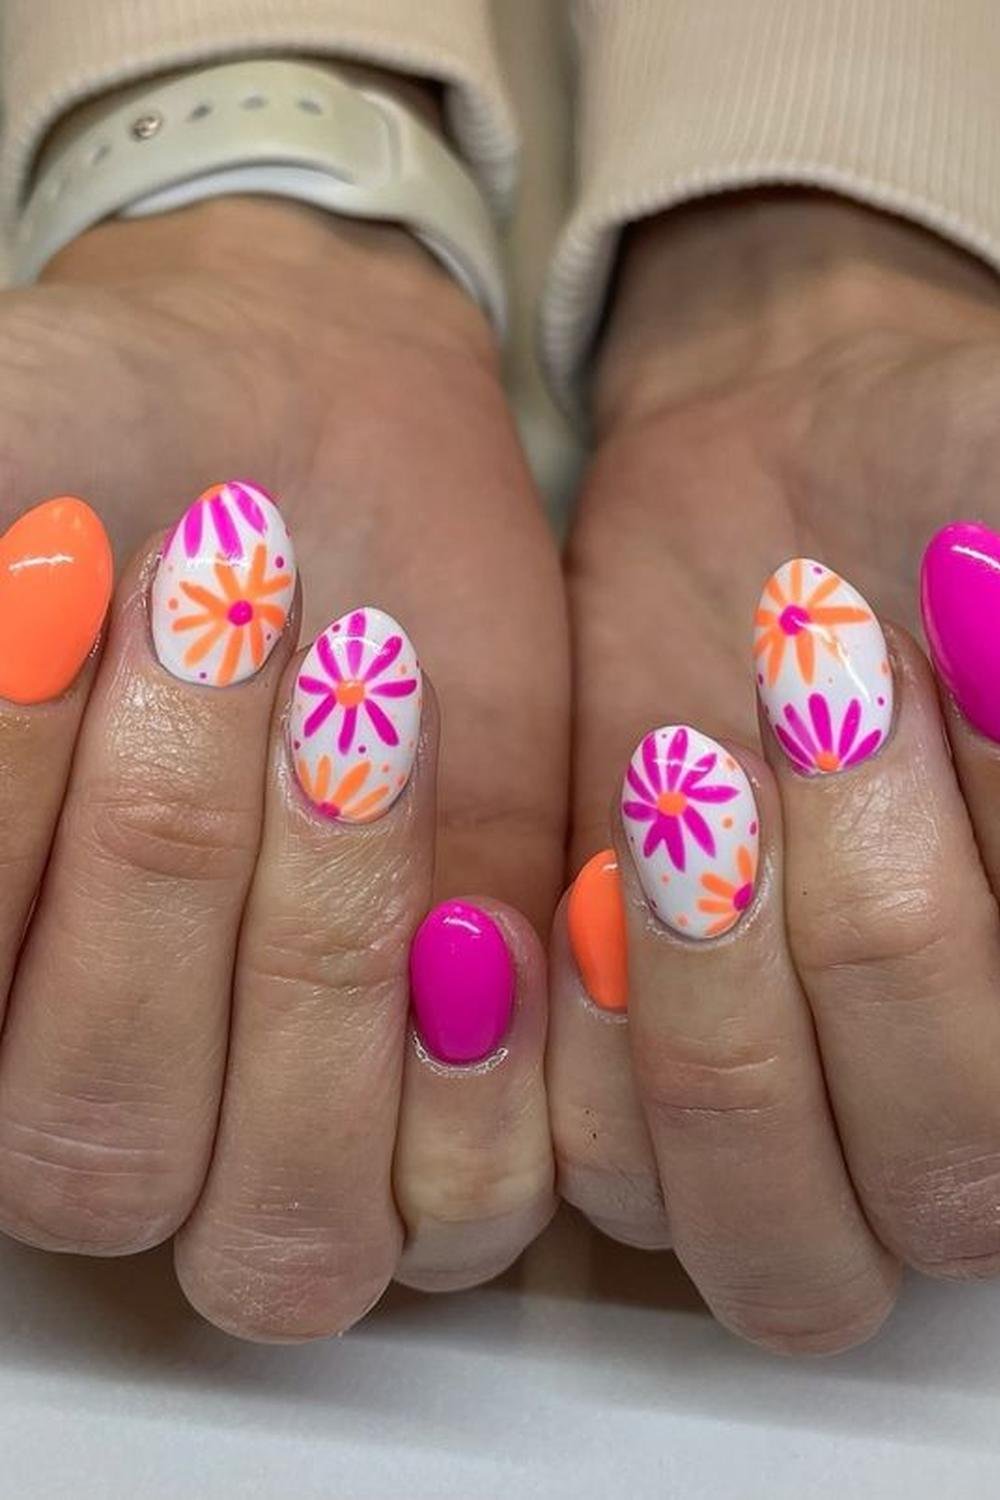 22 - Picture of Pink and Orange Nails